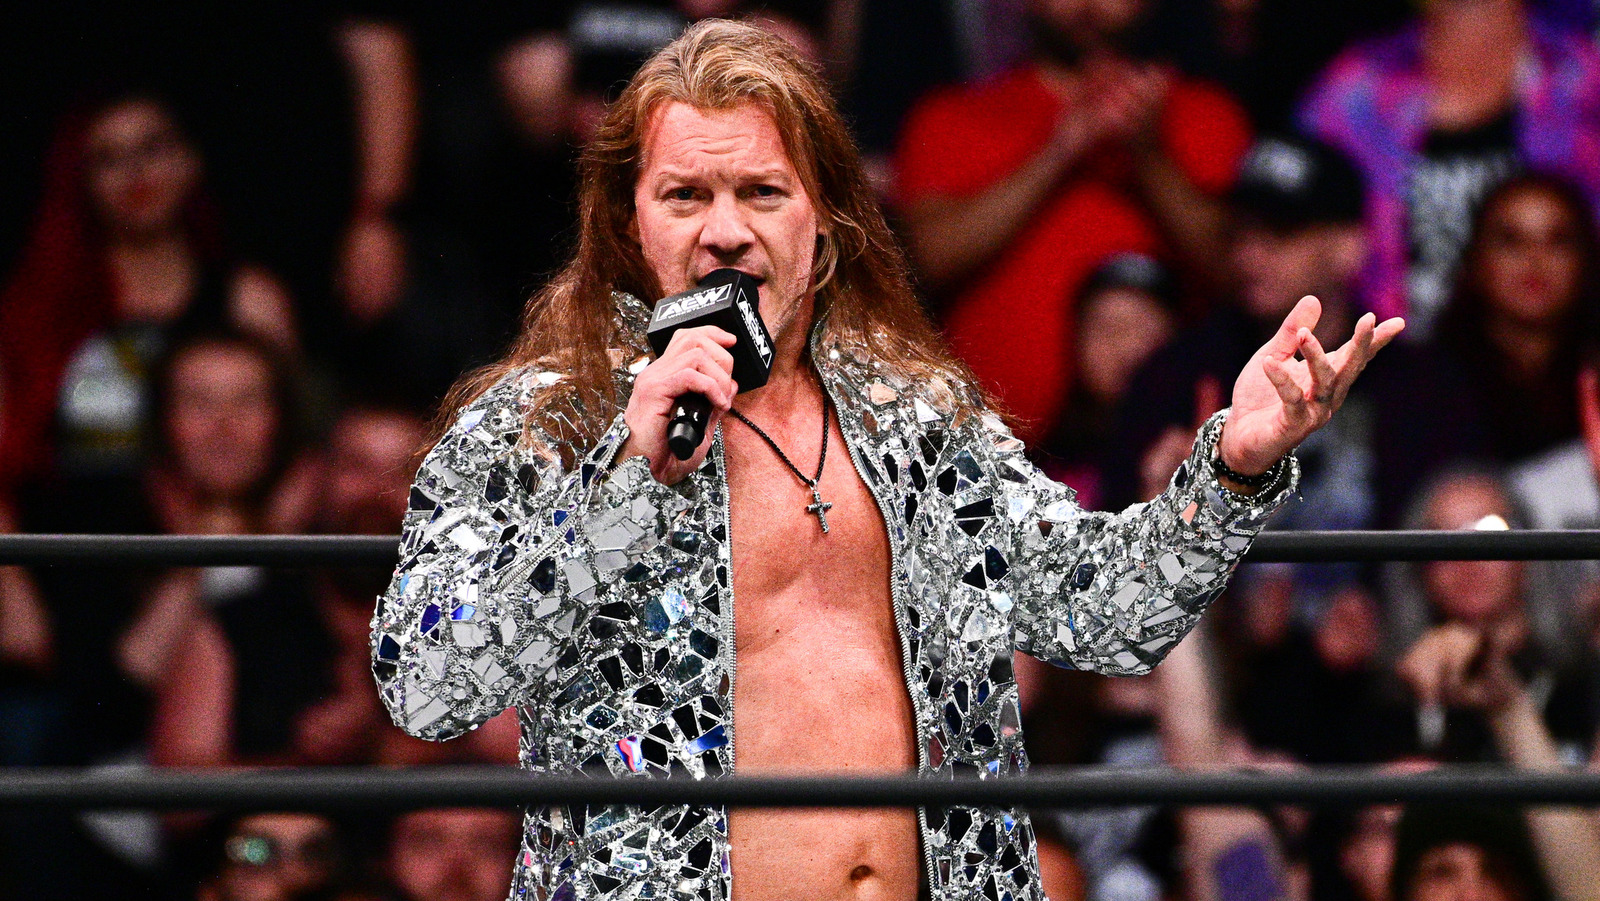 Chris Jericho, Jon Moxley Set For Matches On 200th Episode Of AEW Dynamite